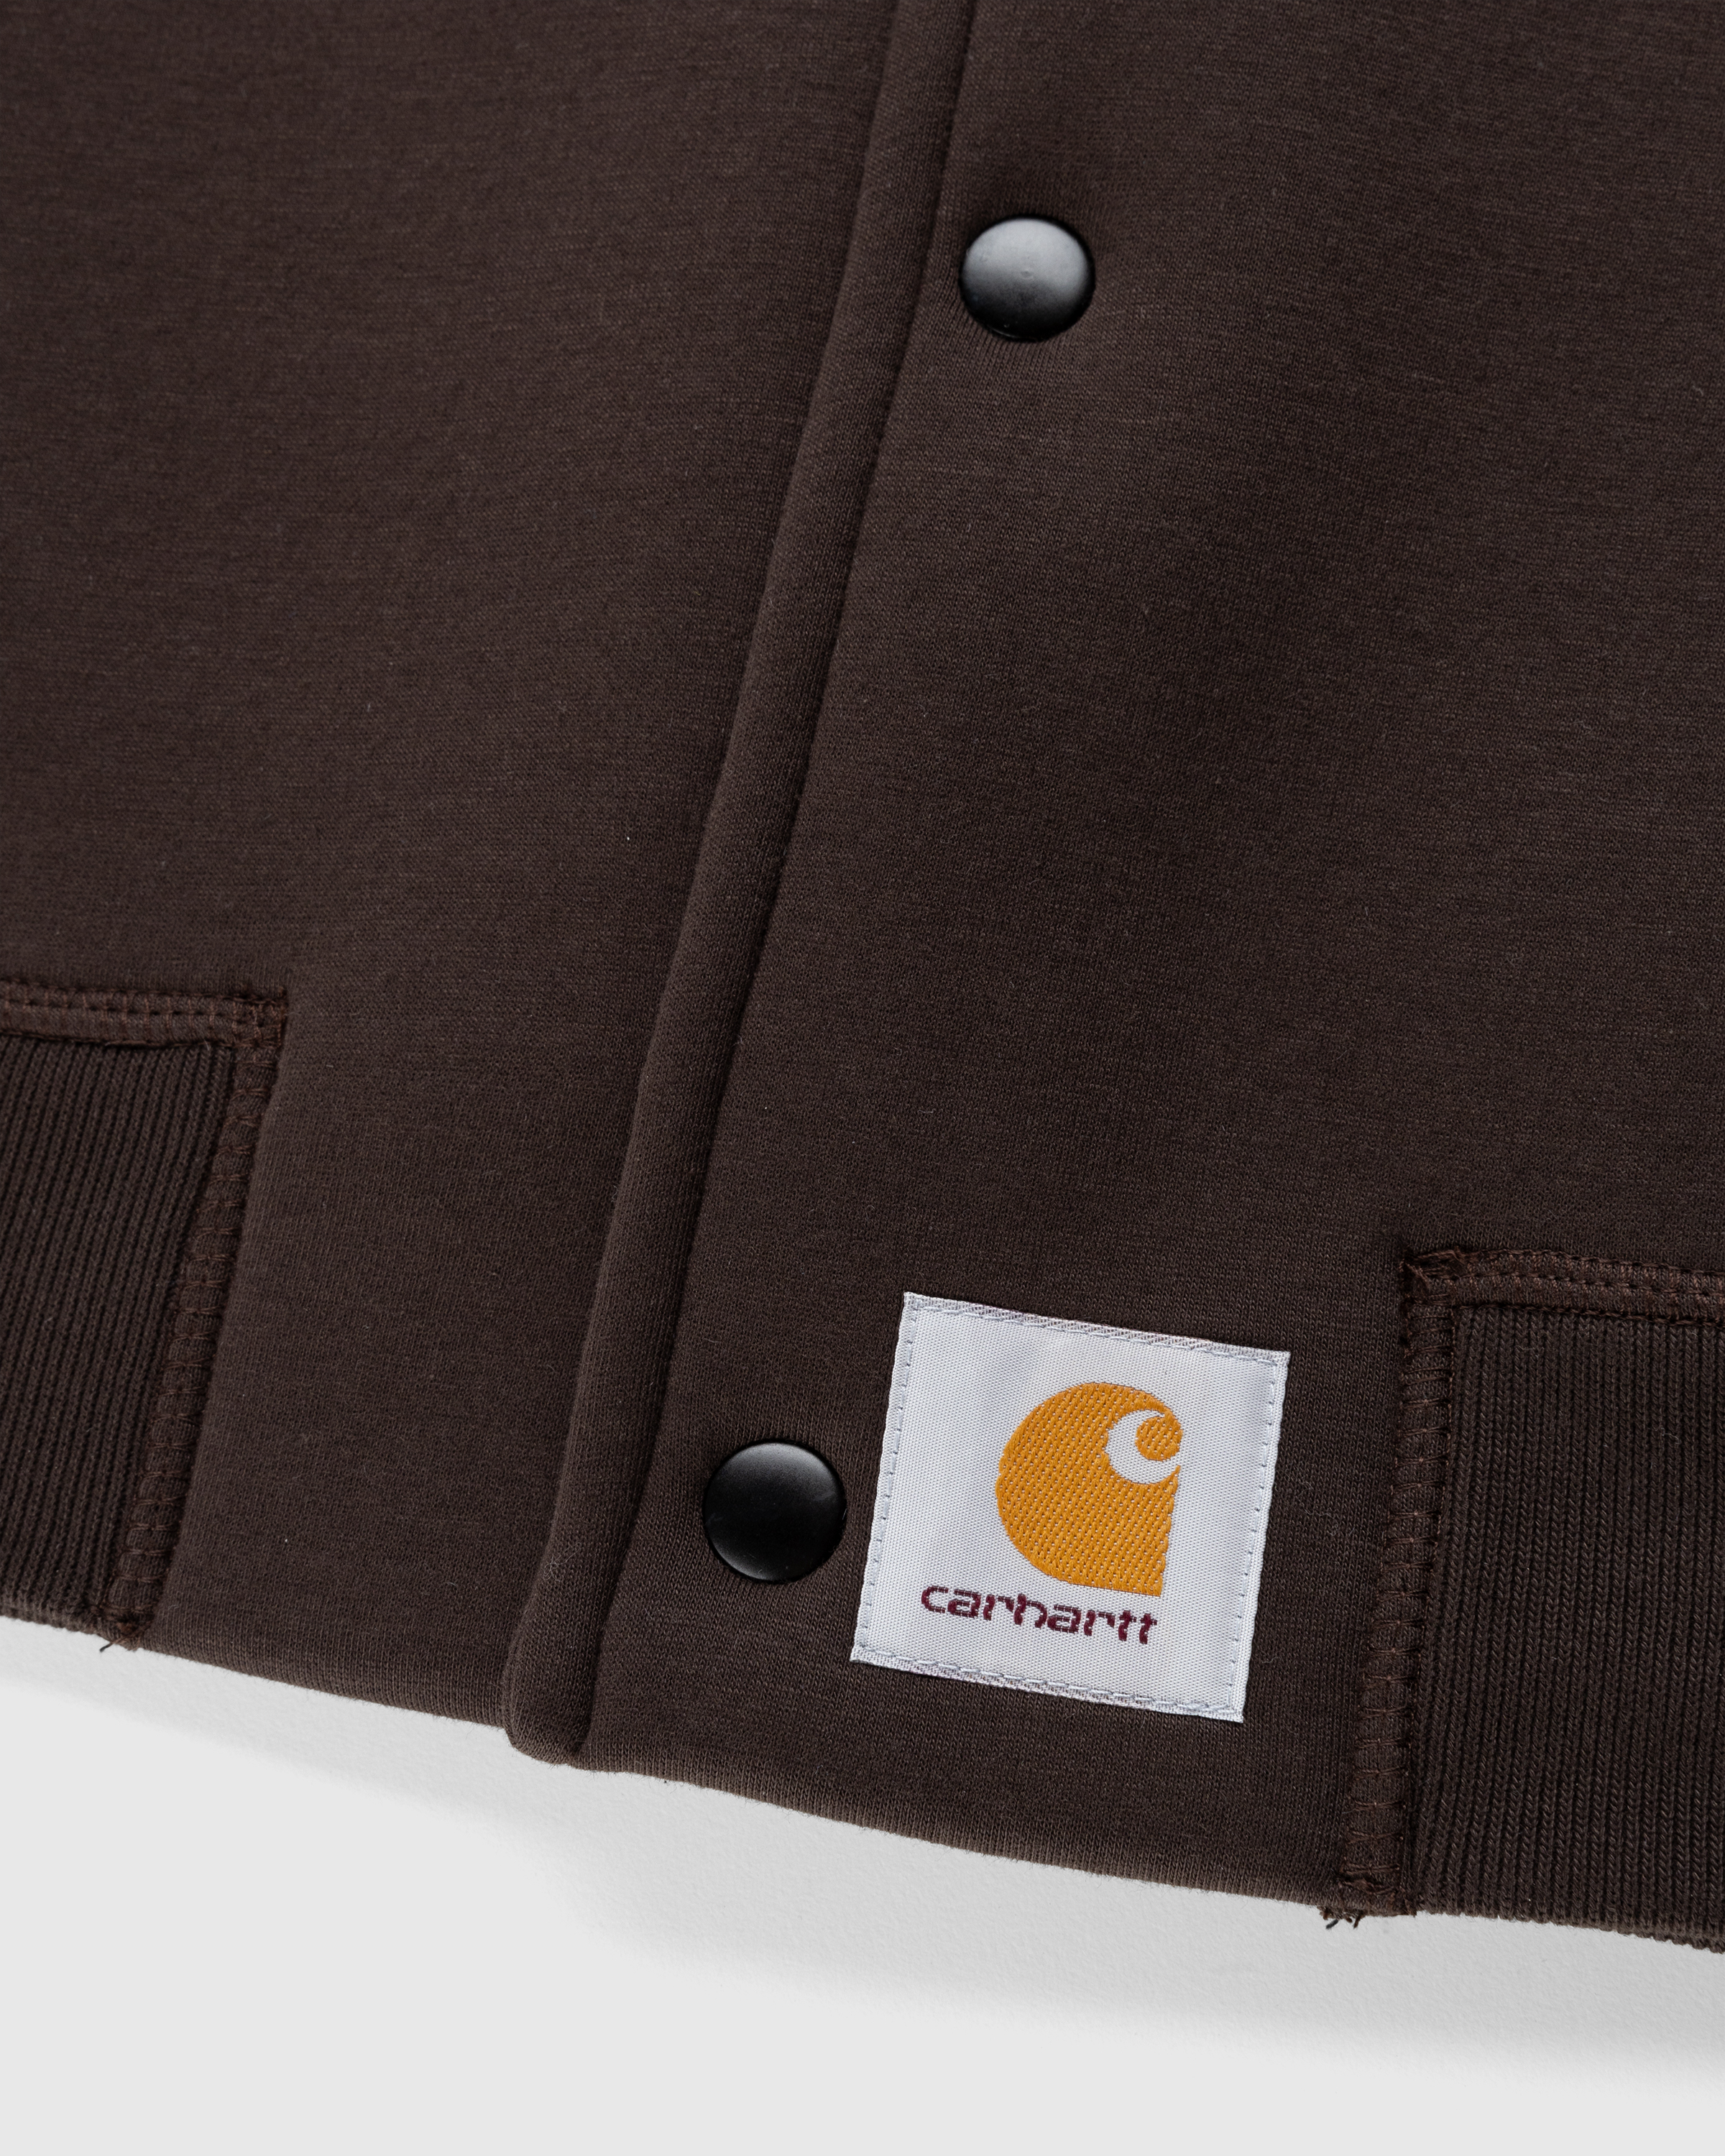 Carhartt WIP – Car-Lux Bomber Tobacco/Grey - Outerwear - Brown - Image 7